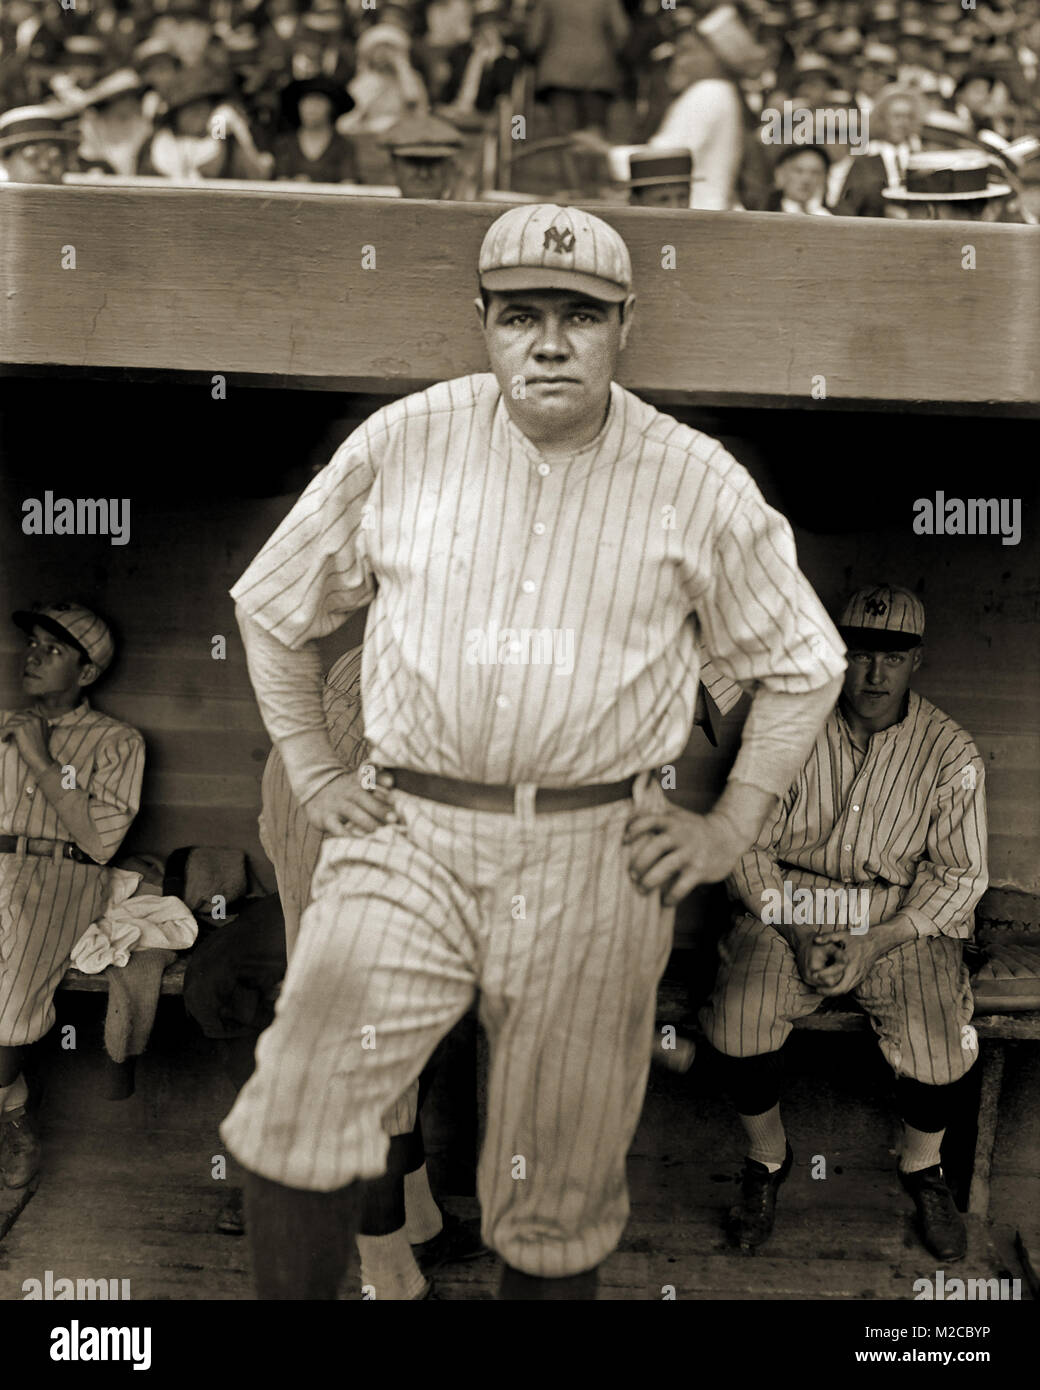 Babe Ruth.Photograph from the George Grantham Bain Collection Stock Photo